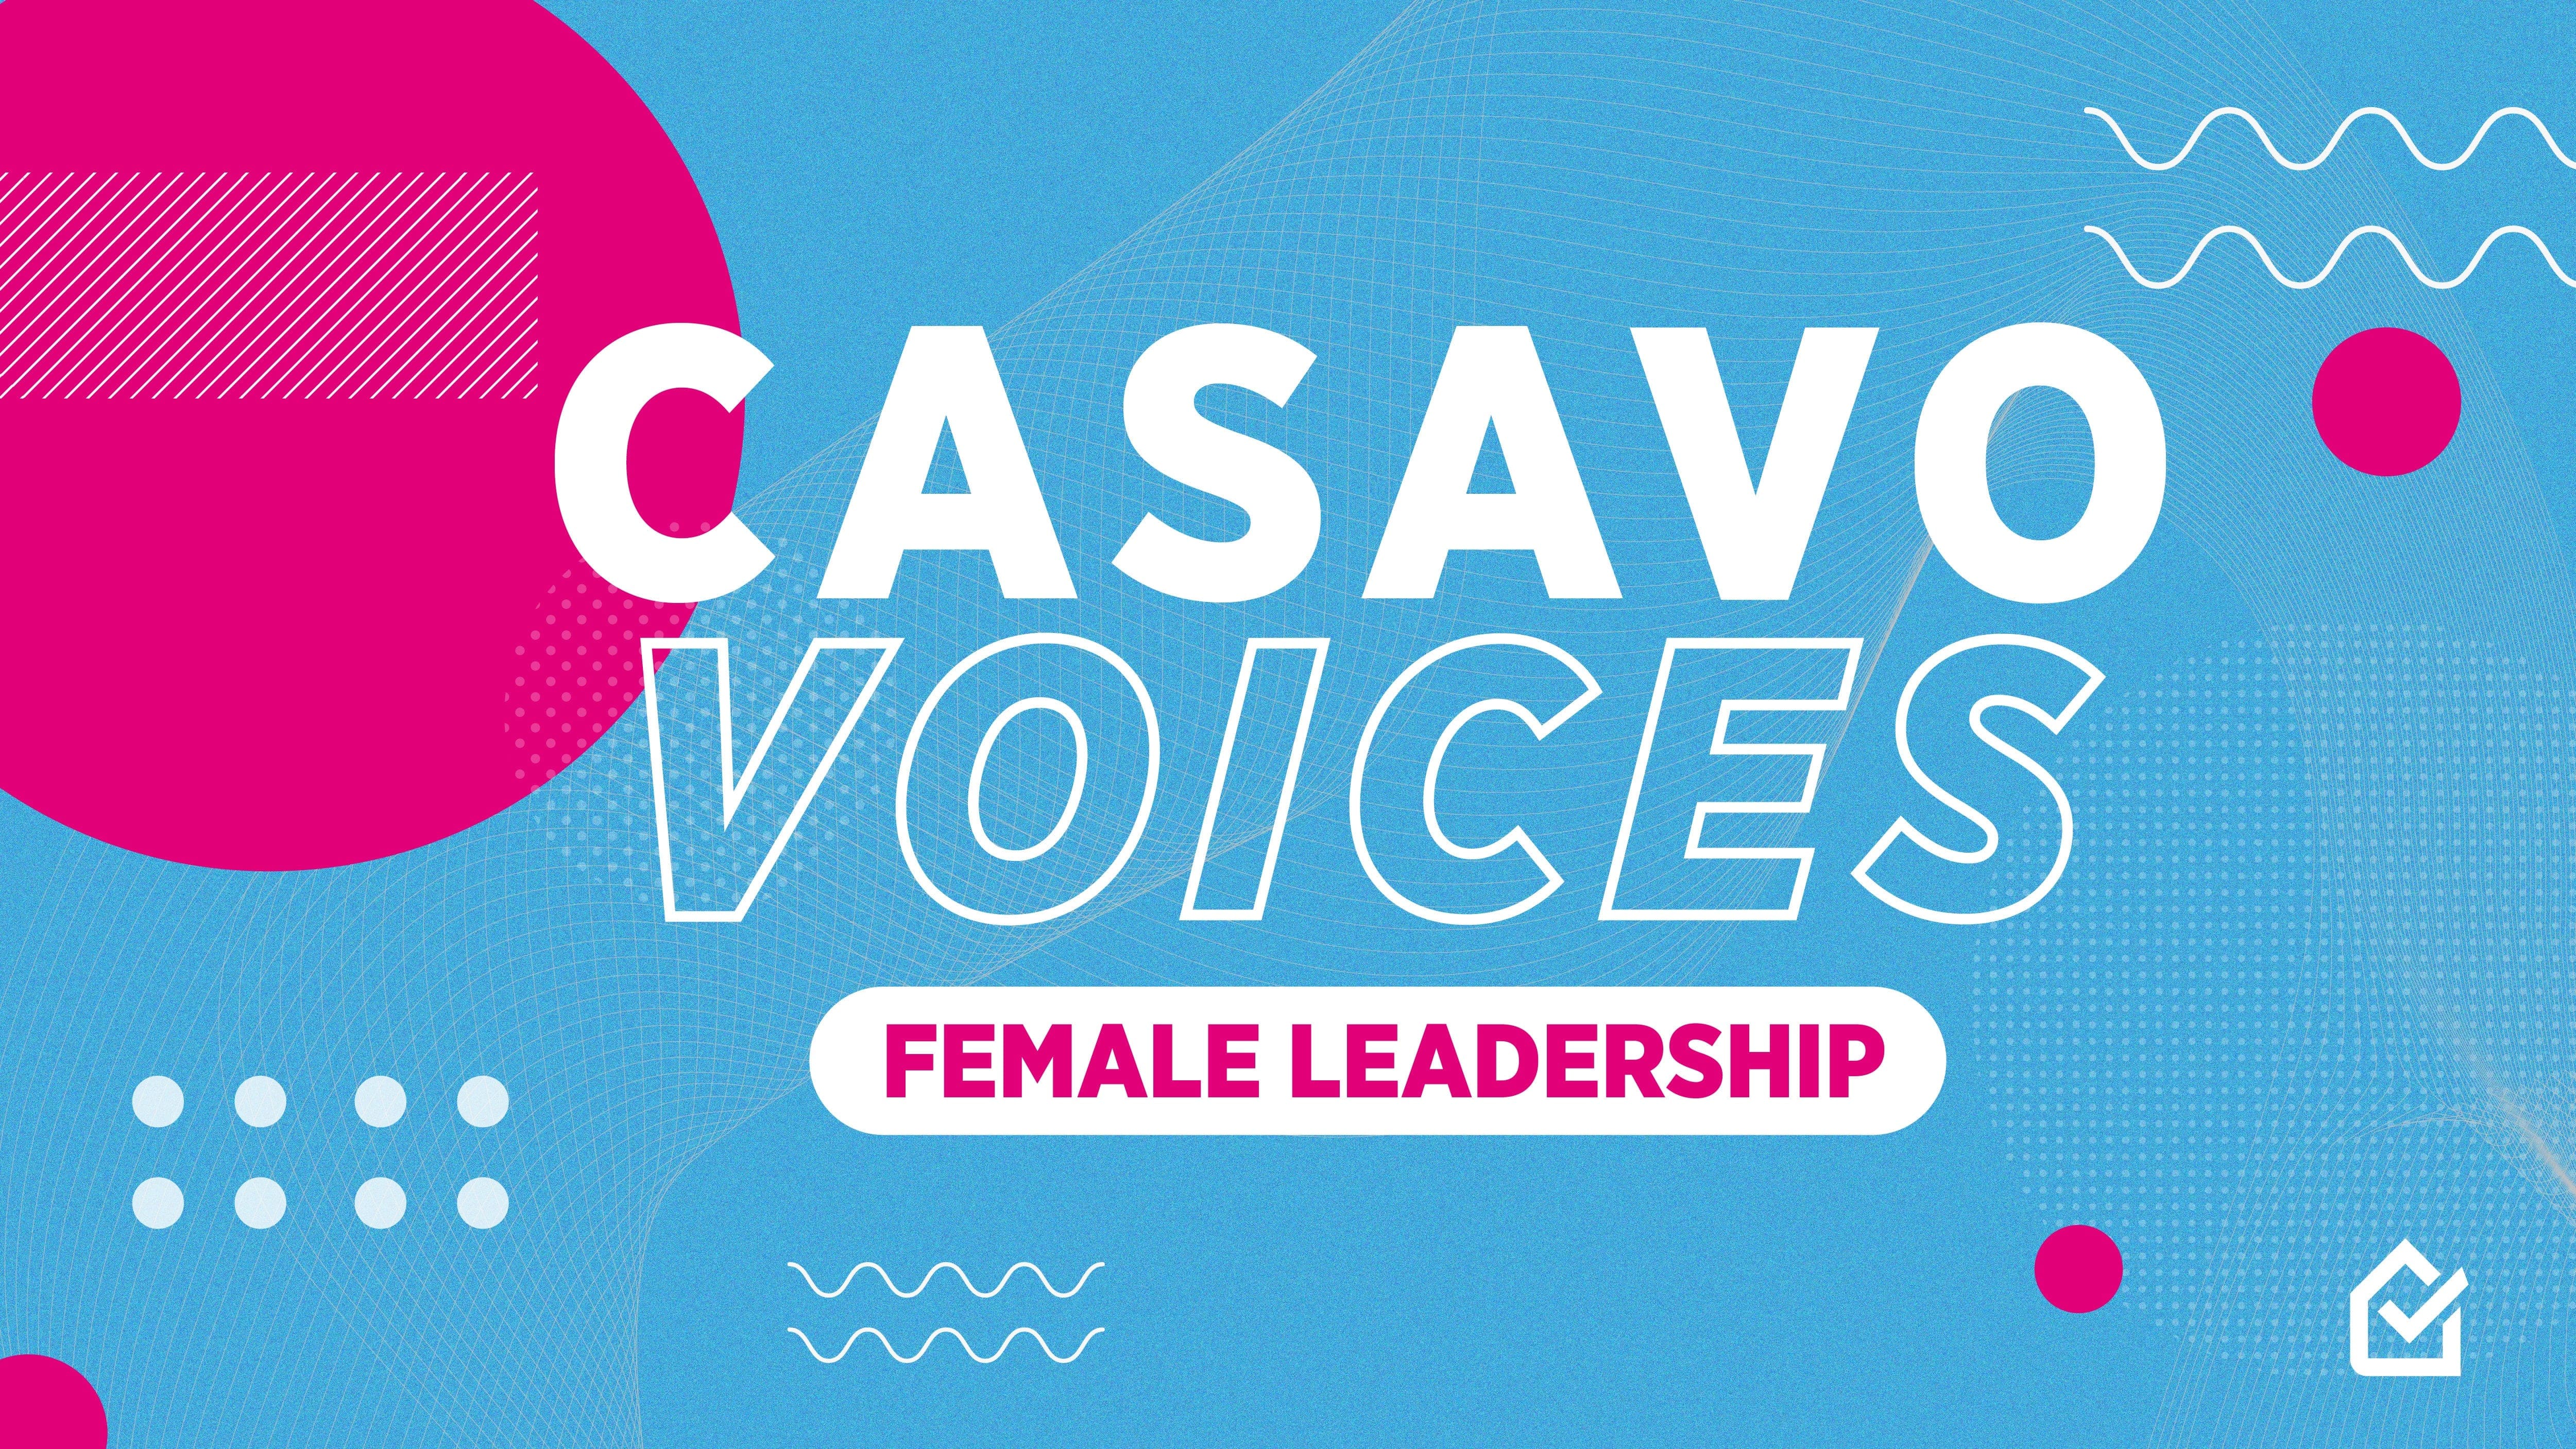 Casavo Voices. What does it take to be a female leader?